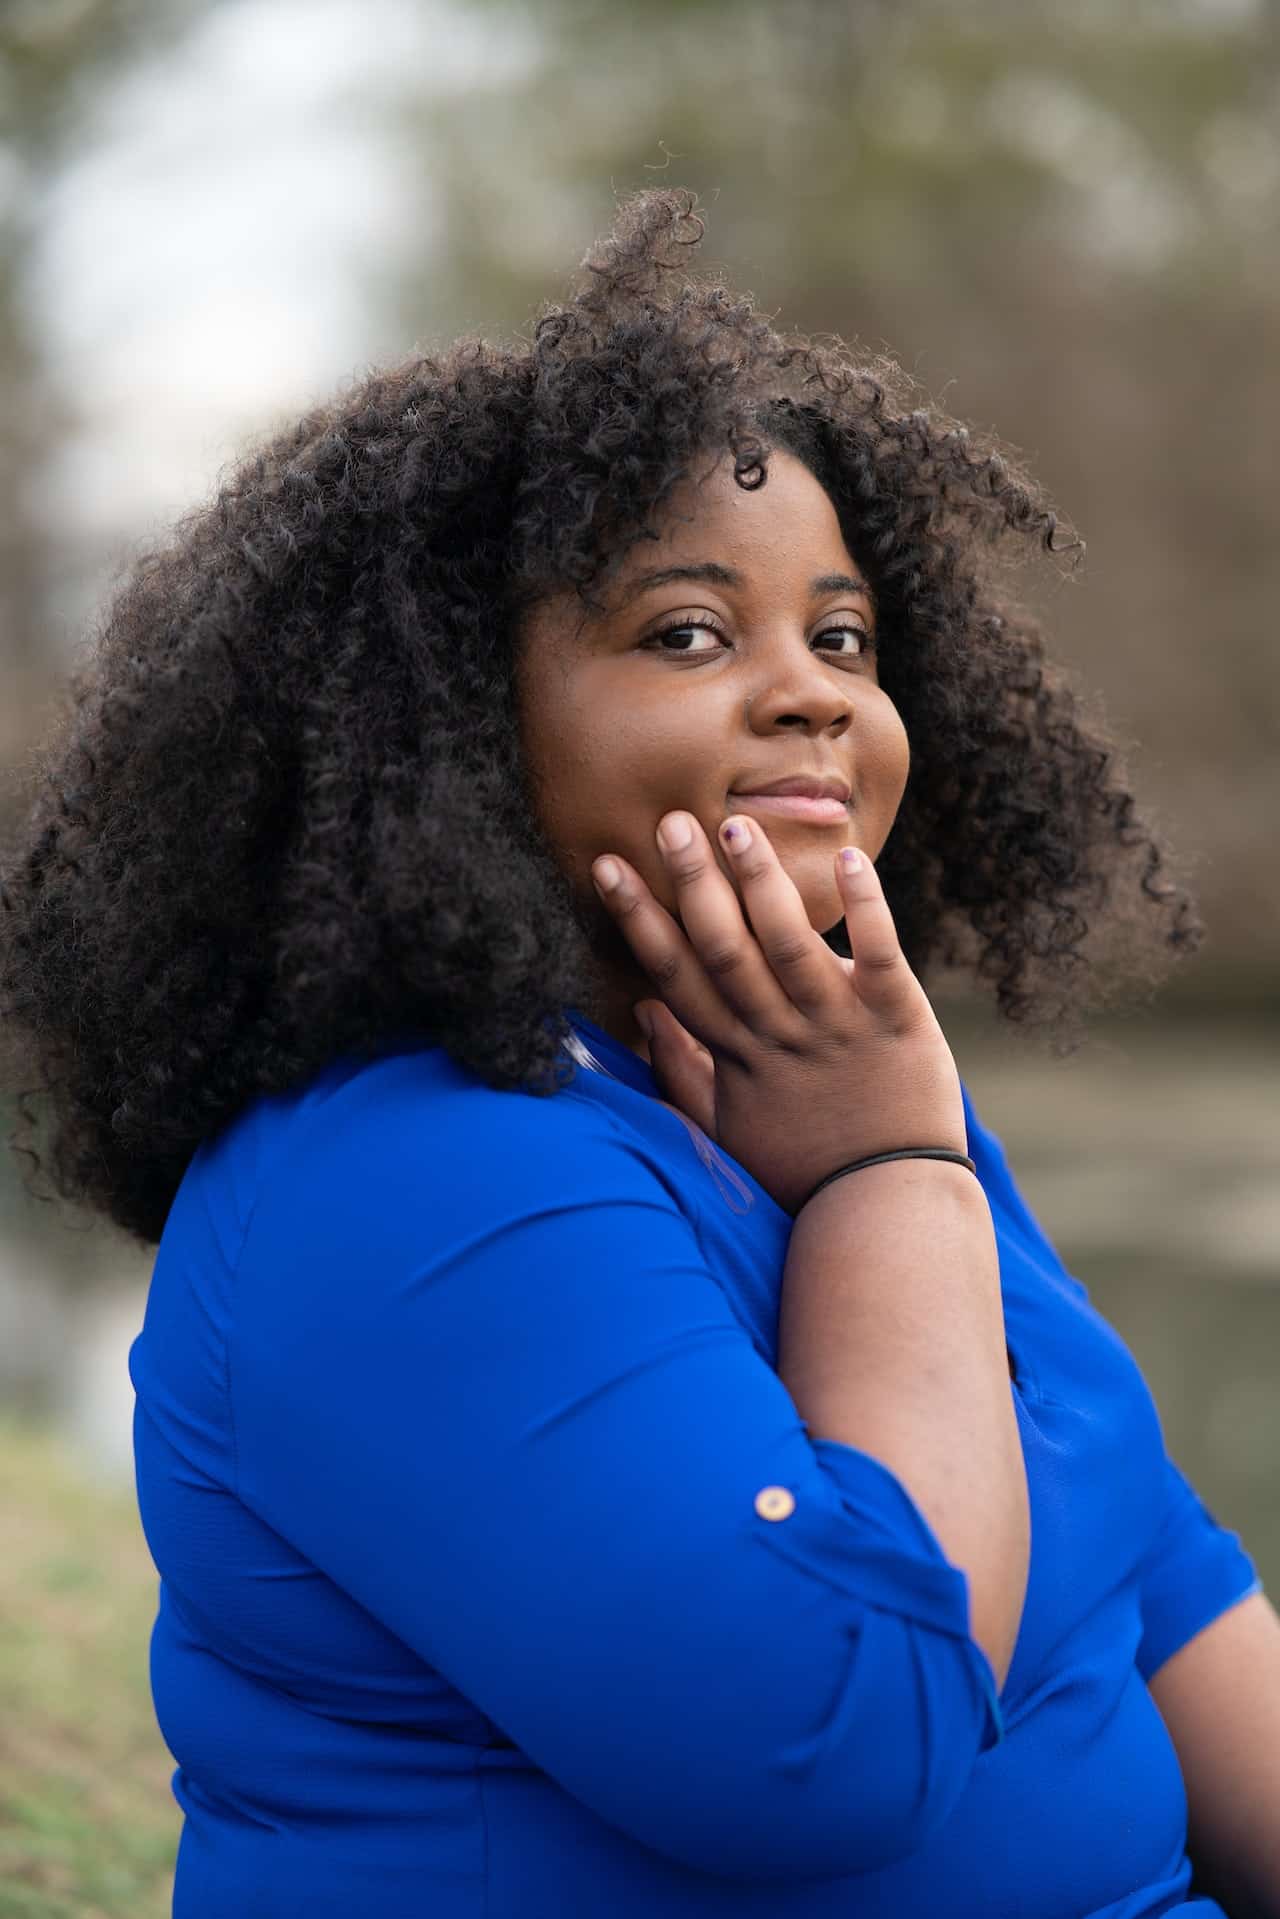 A Black woman with curly hair looks at the camera with her hand on her face. She is wearing a blue shirt.